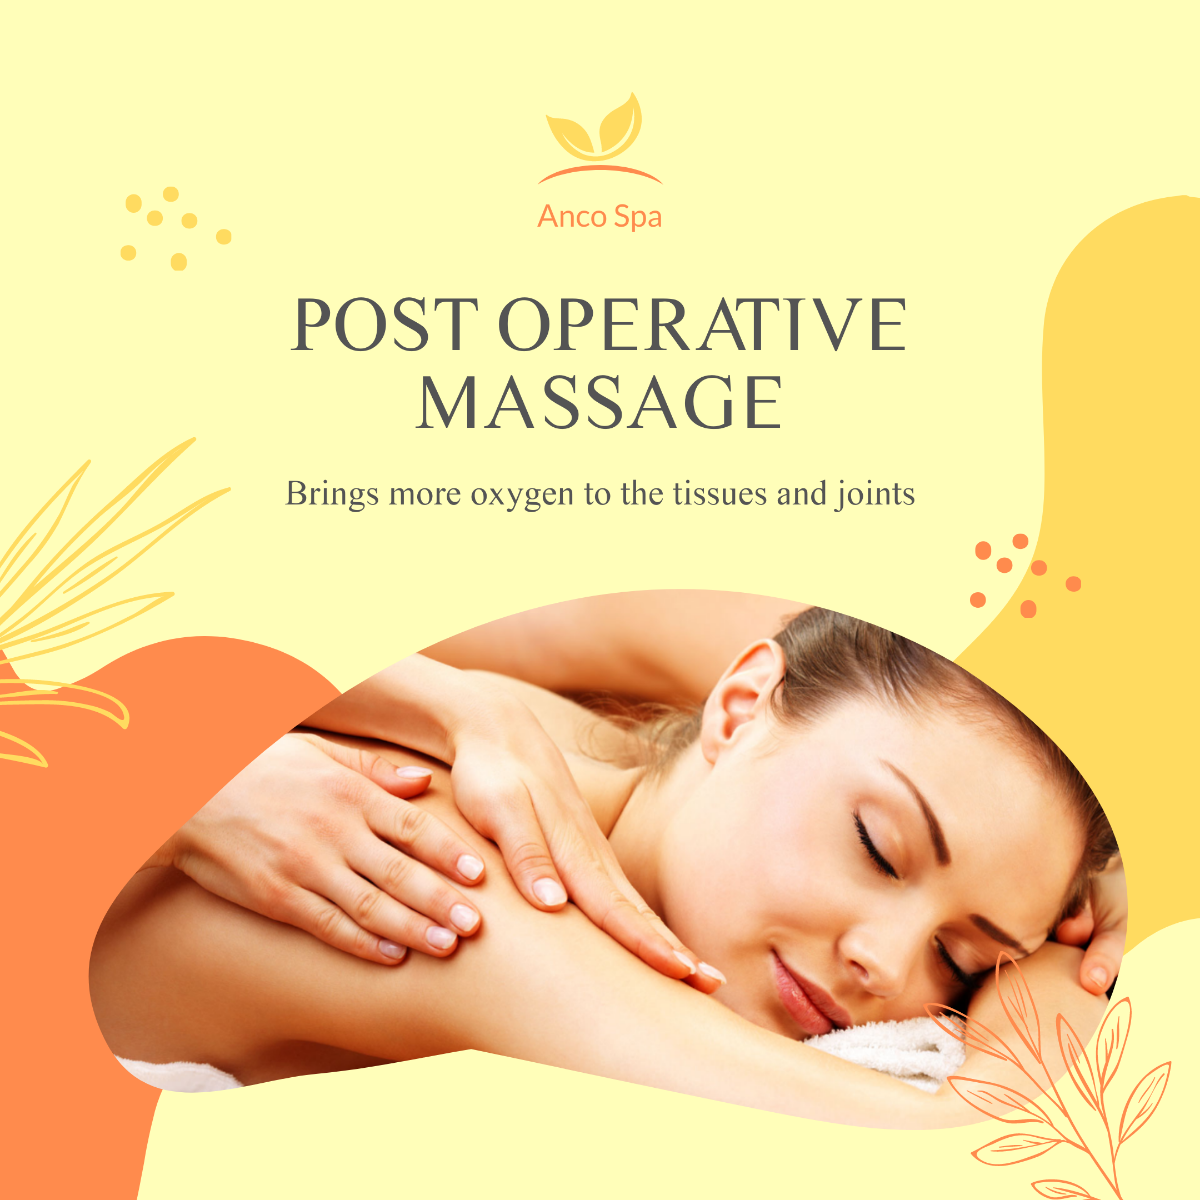 Post Operative Massage Therapy Post, Facebook, Instagram Template